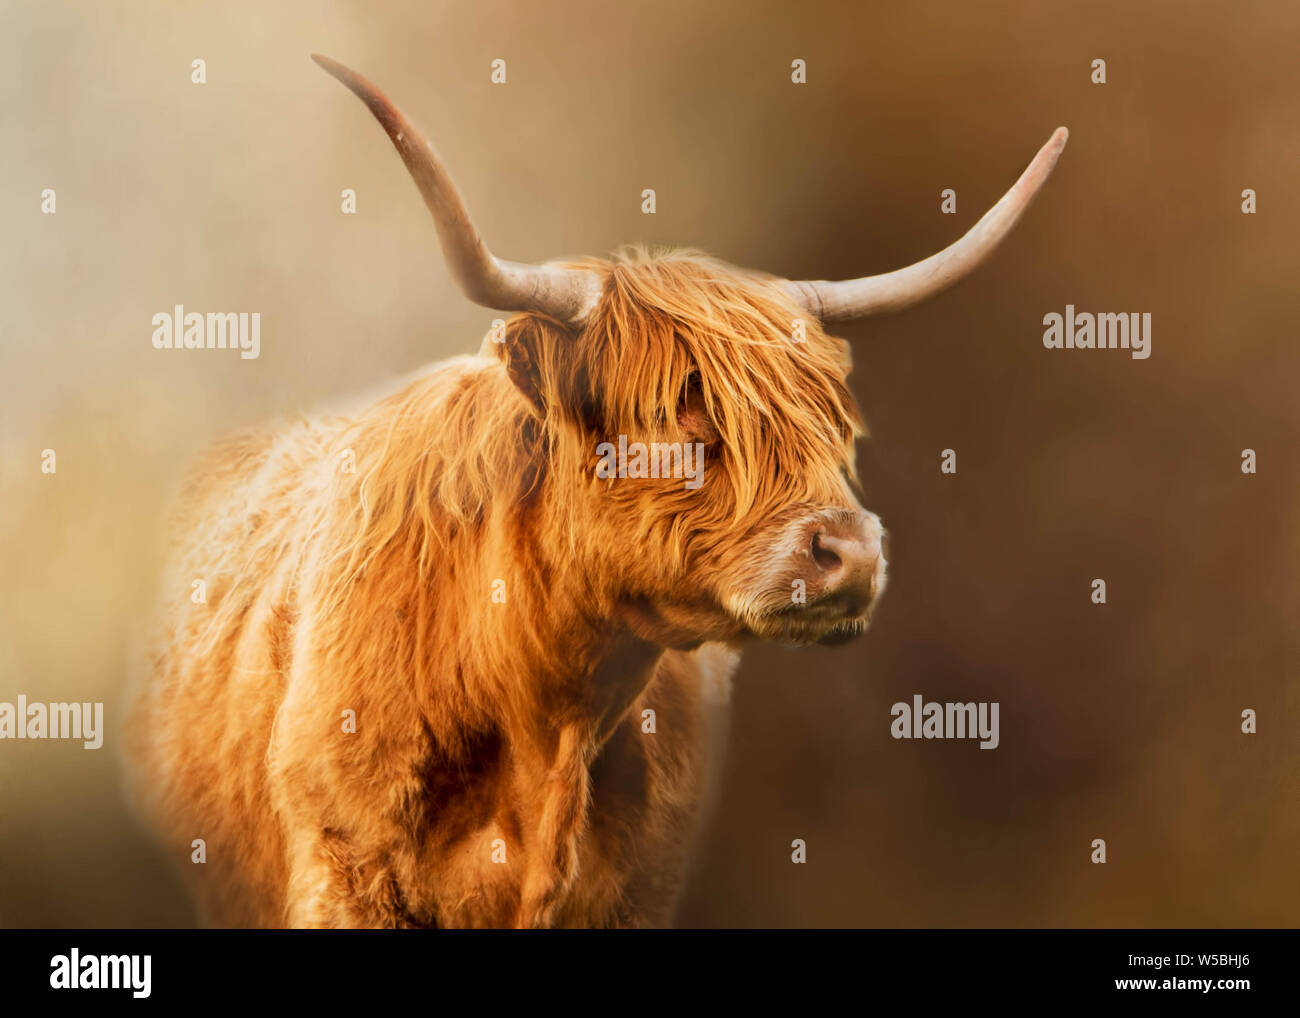 Highland Cattle appearing out of the mist Stock Photo